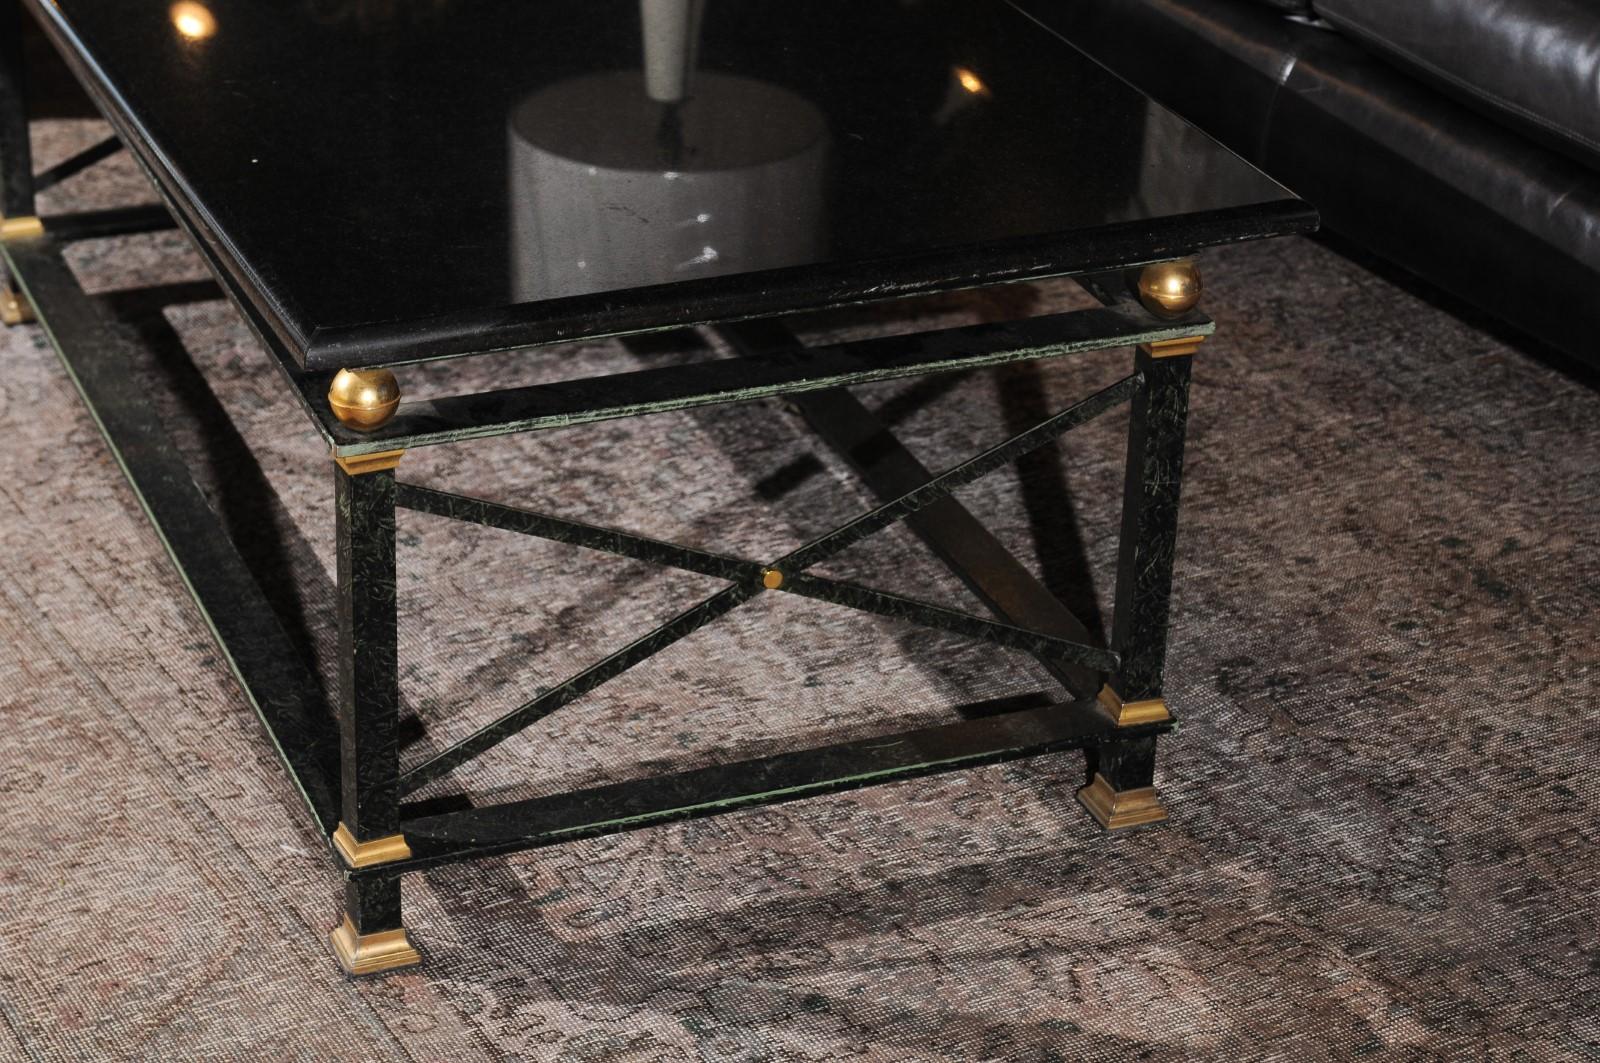 20th Century French Parisian Coffee Table with Black Marble Top, Iron Base and Brass Accents